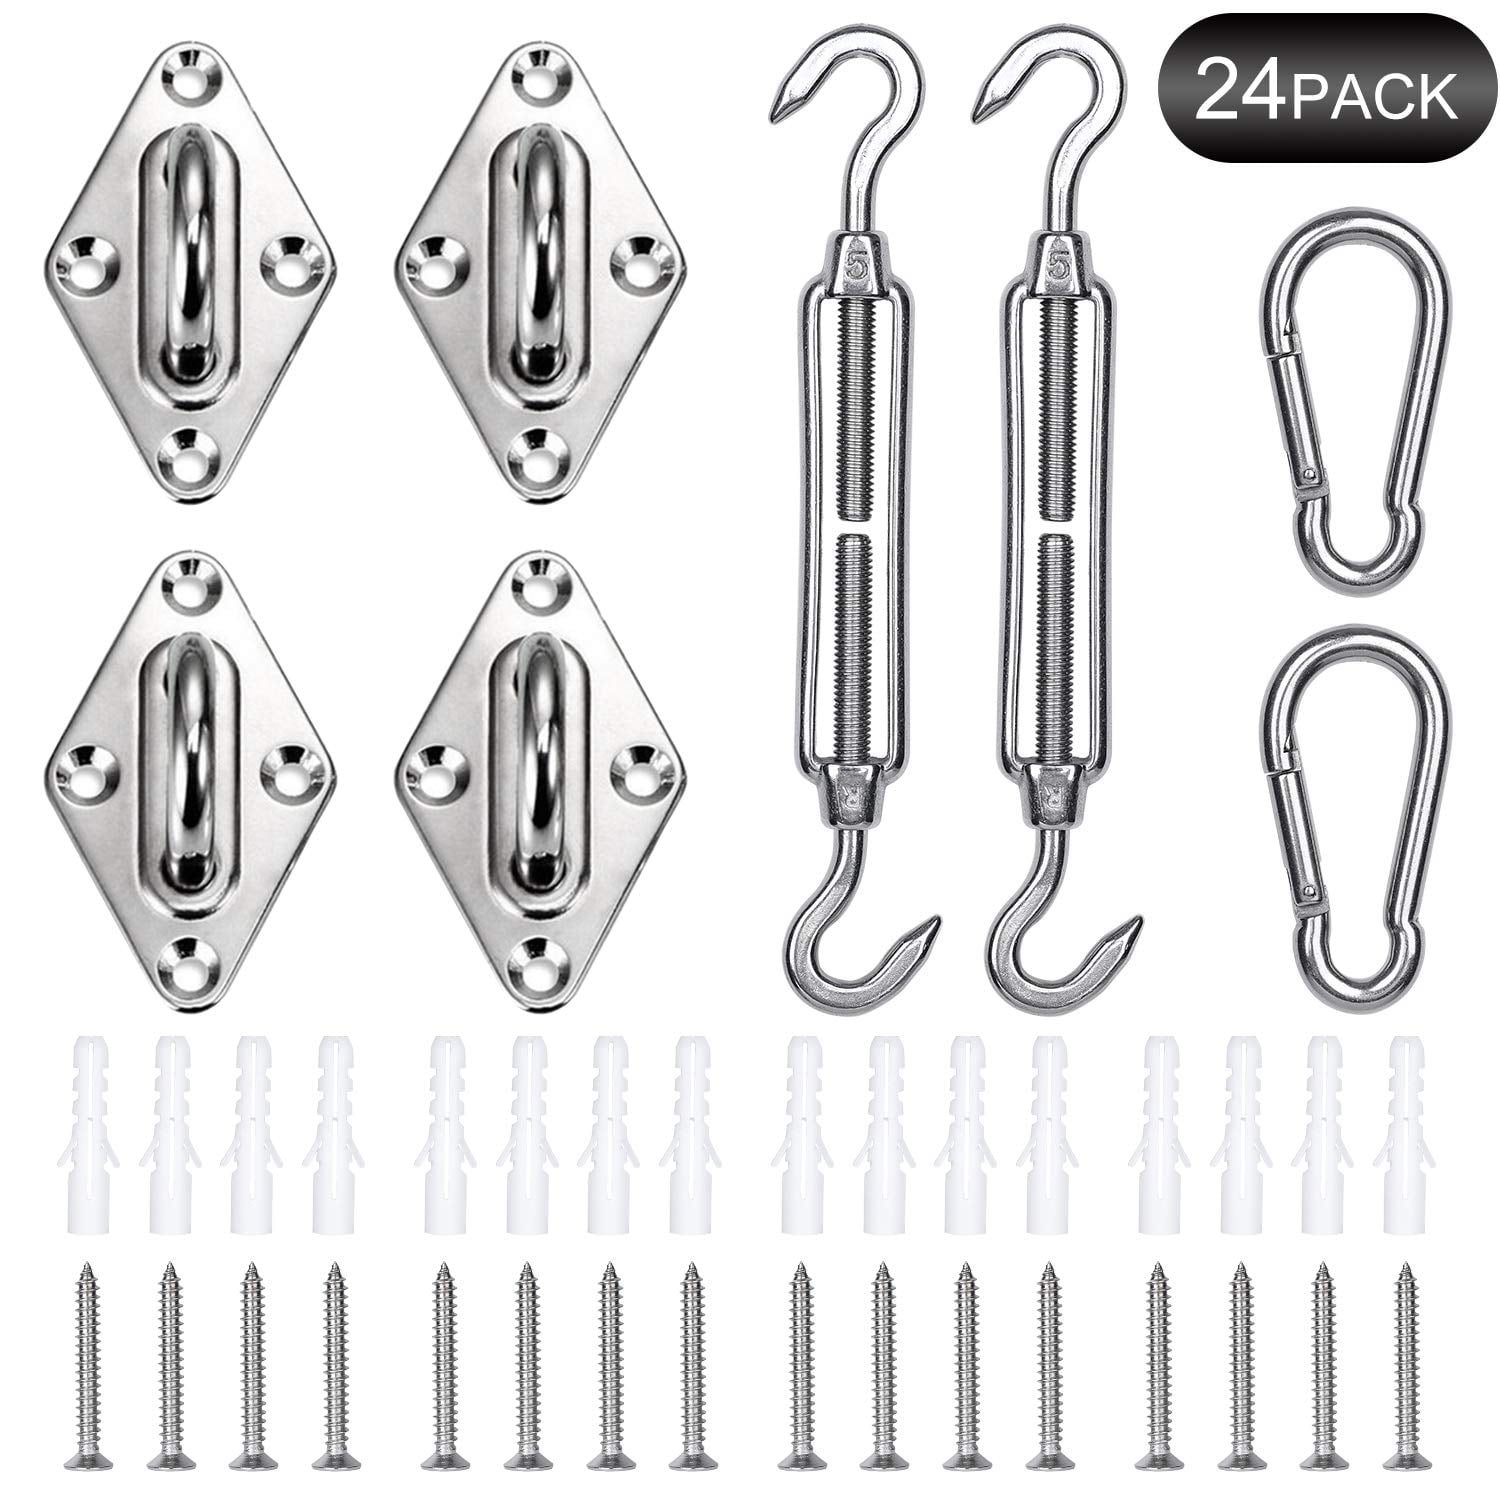 Anti-Rust sail Shade Hardware kit of Heavy Duty 40Pcs HELEMAN Shade Sail Hardware Kit for Rectangle/Square Sun Shade Sail Installation in Patio Lawn and Garden 